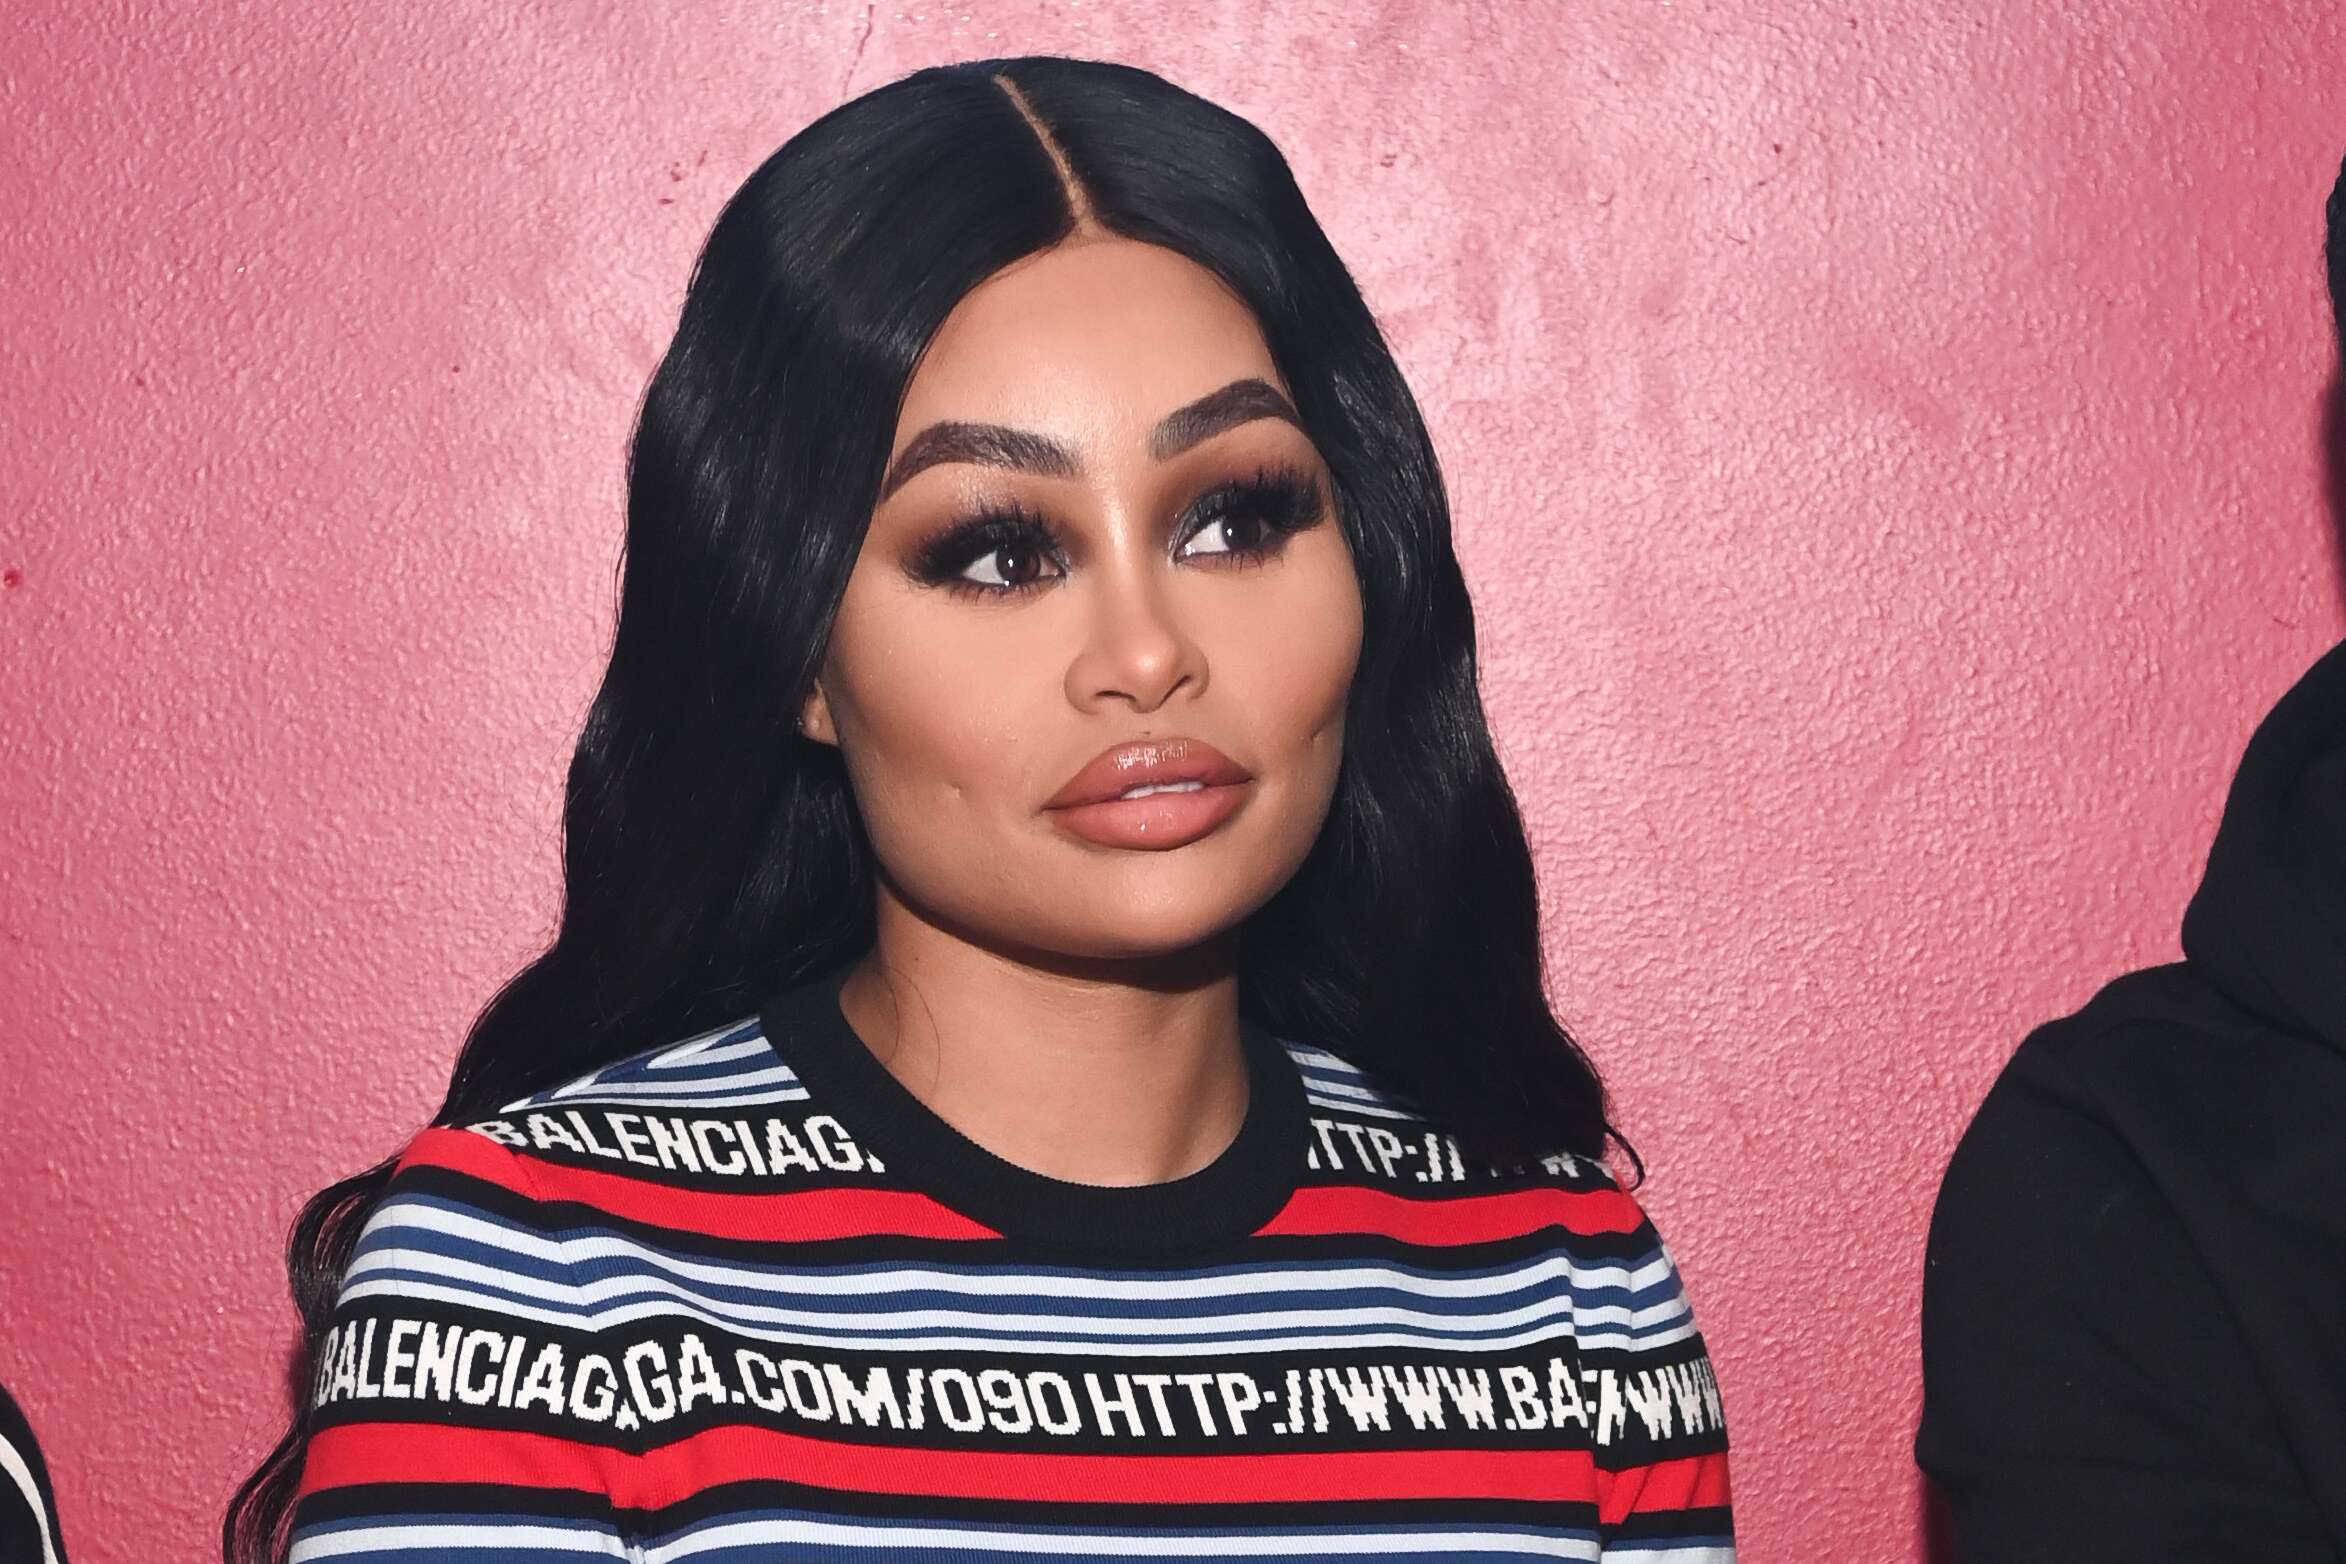 Blac Chyna Said She Got Her Doctorate, But The School Behind It Is Concerning